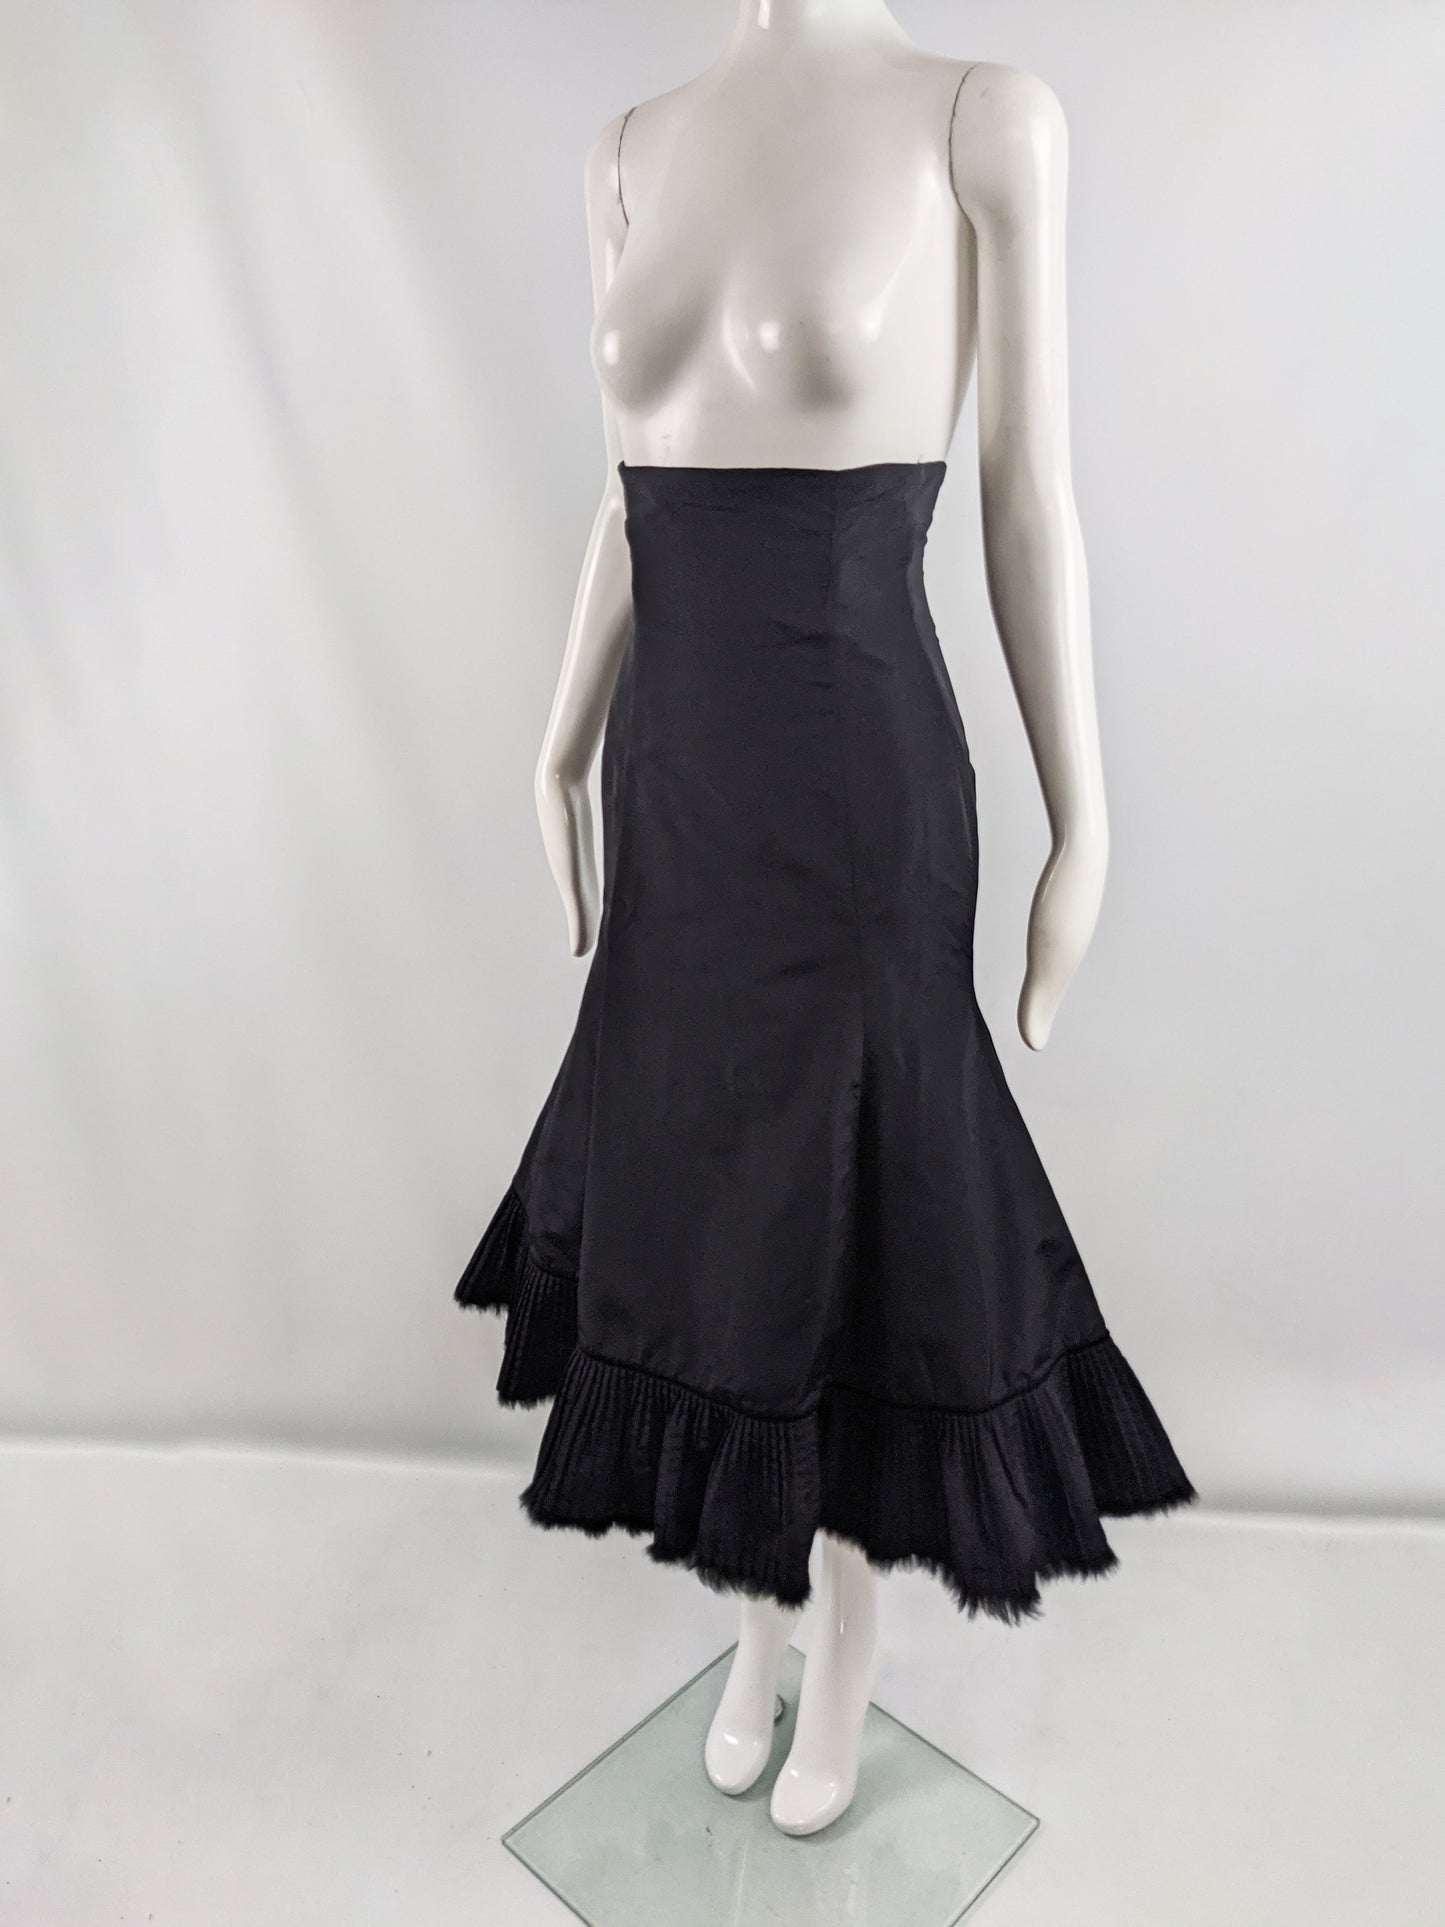 Preowned Black Ultra High Waist Structured Mermaid Skirt, A/W 2005